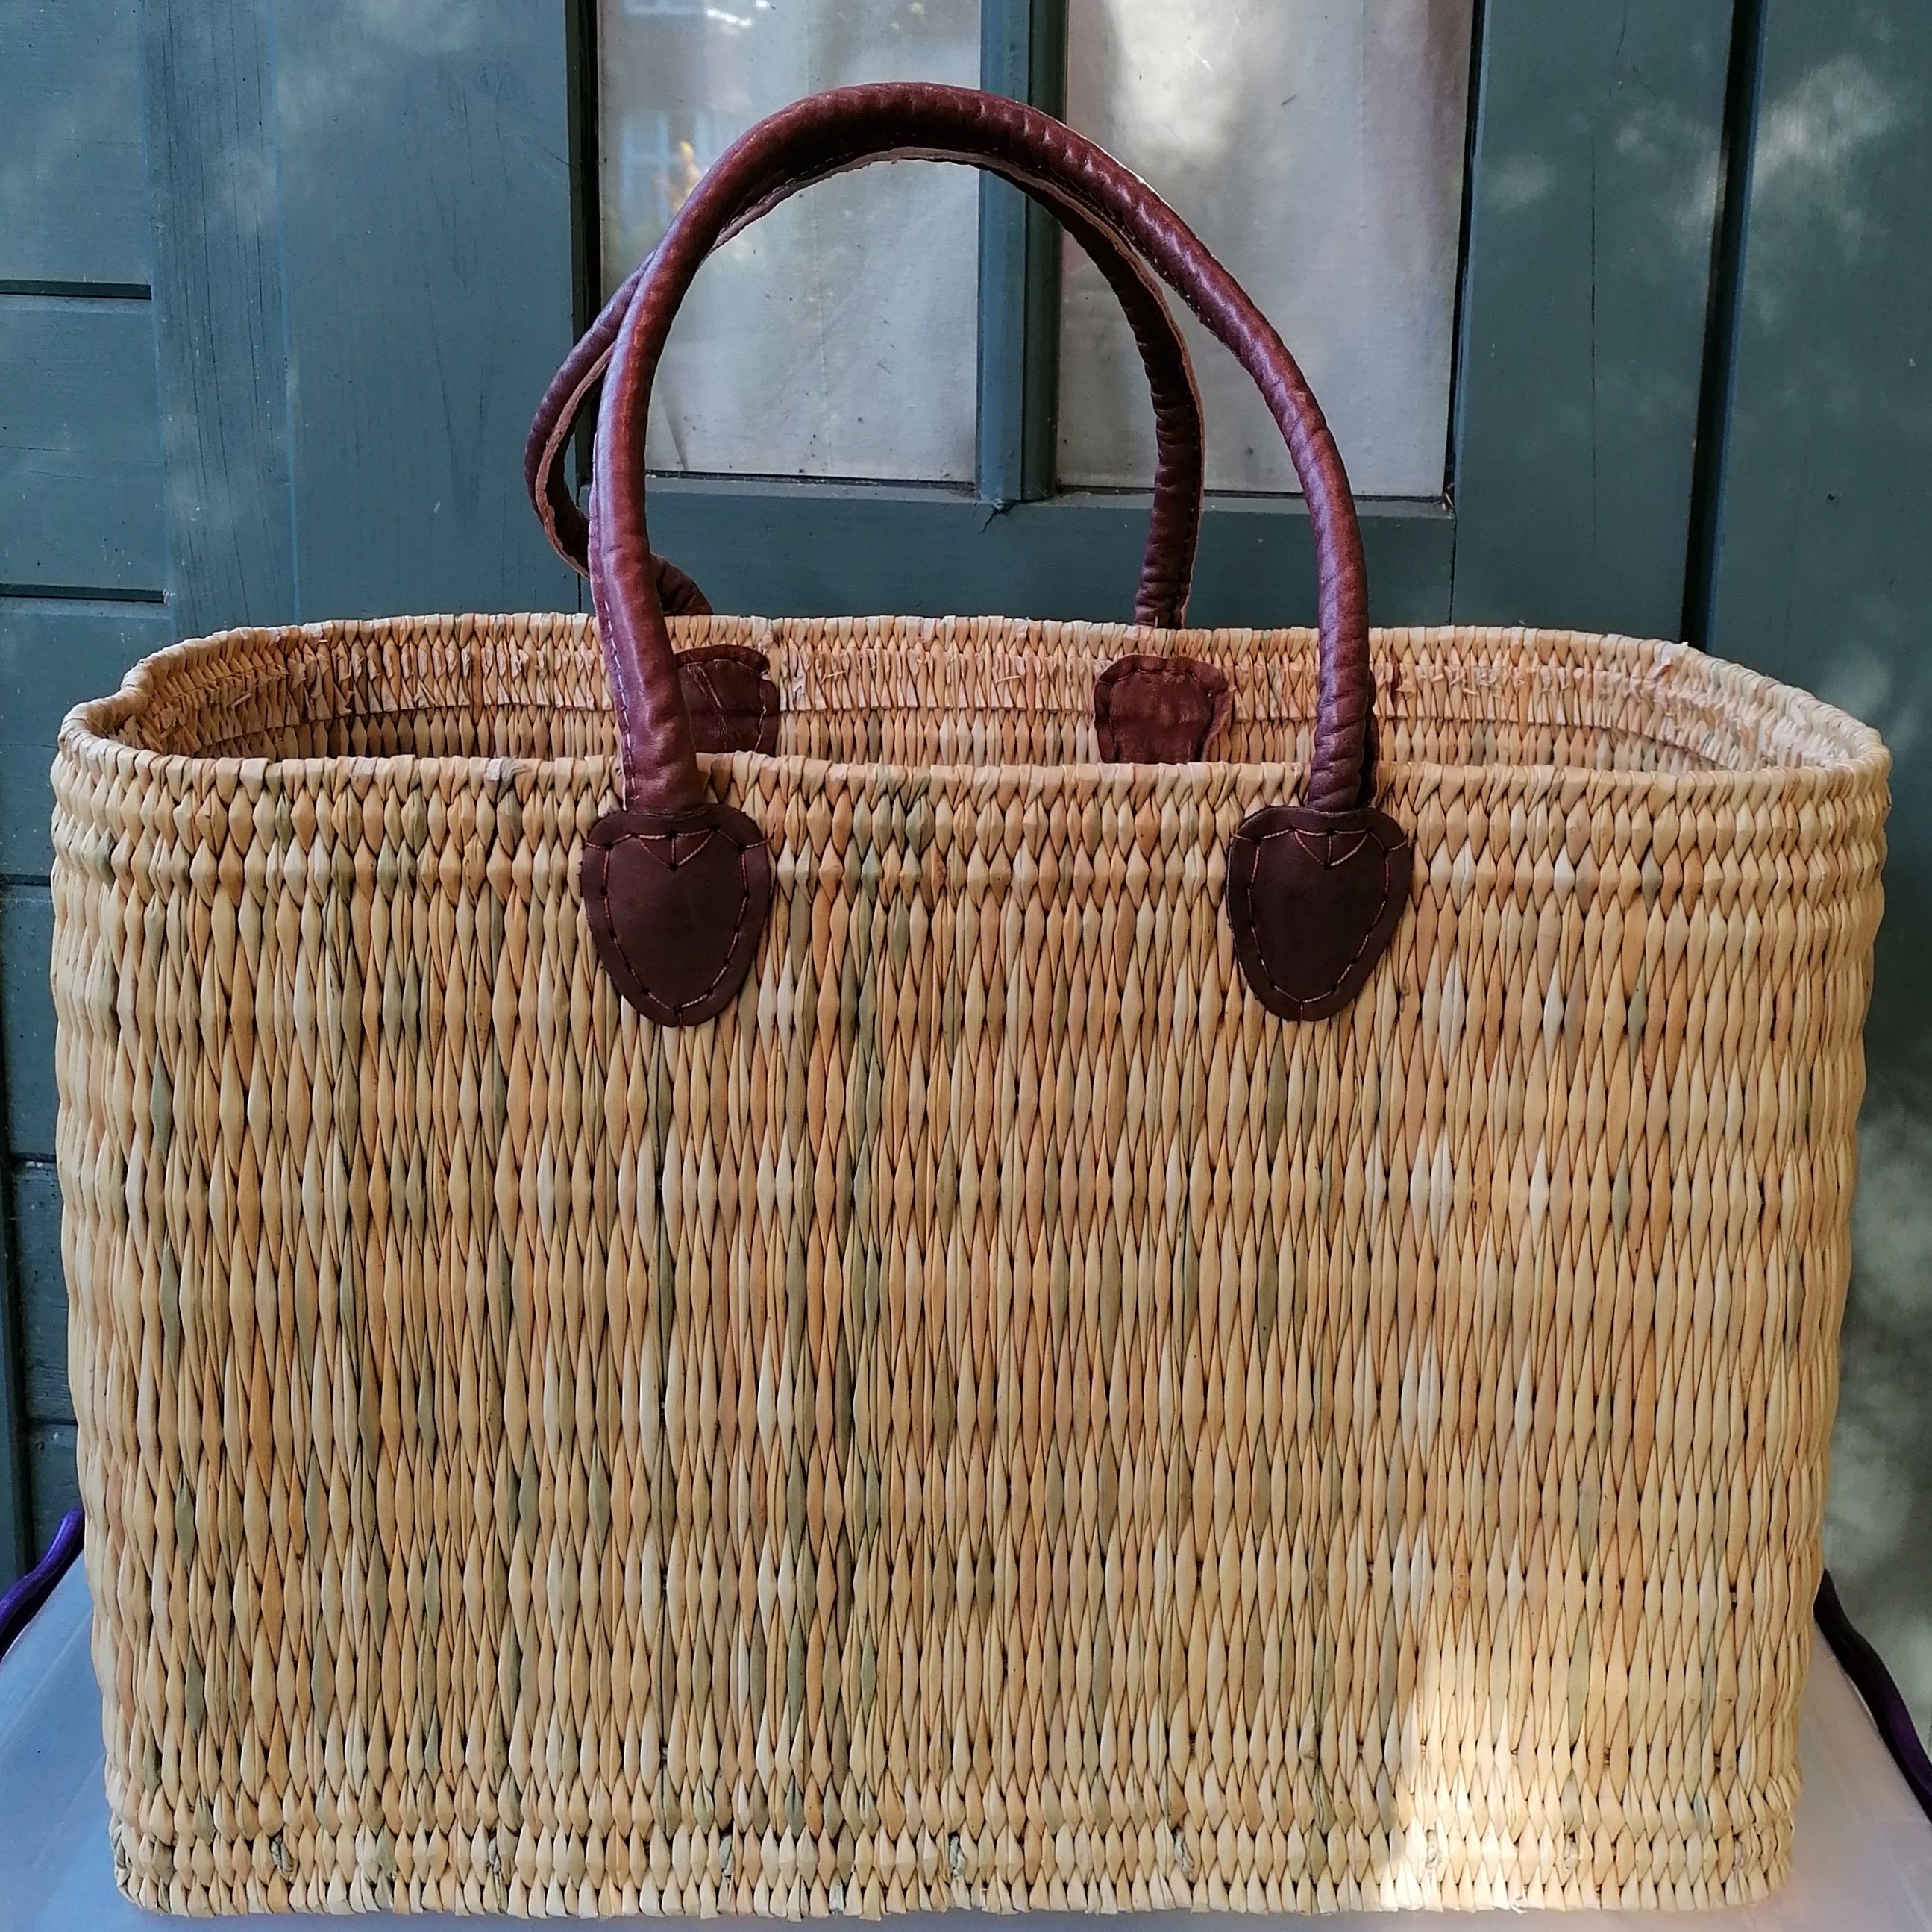 French Market Basket with long handles